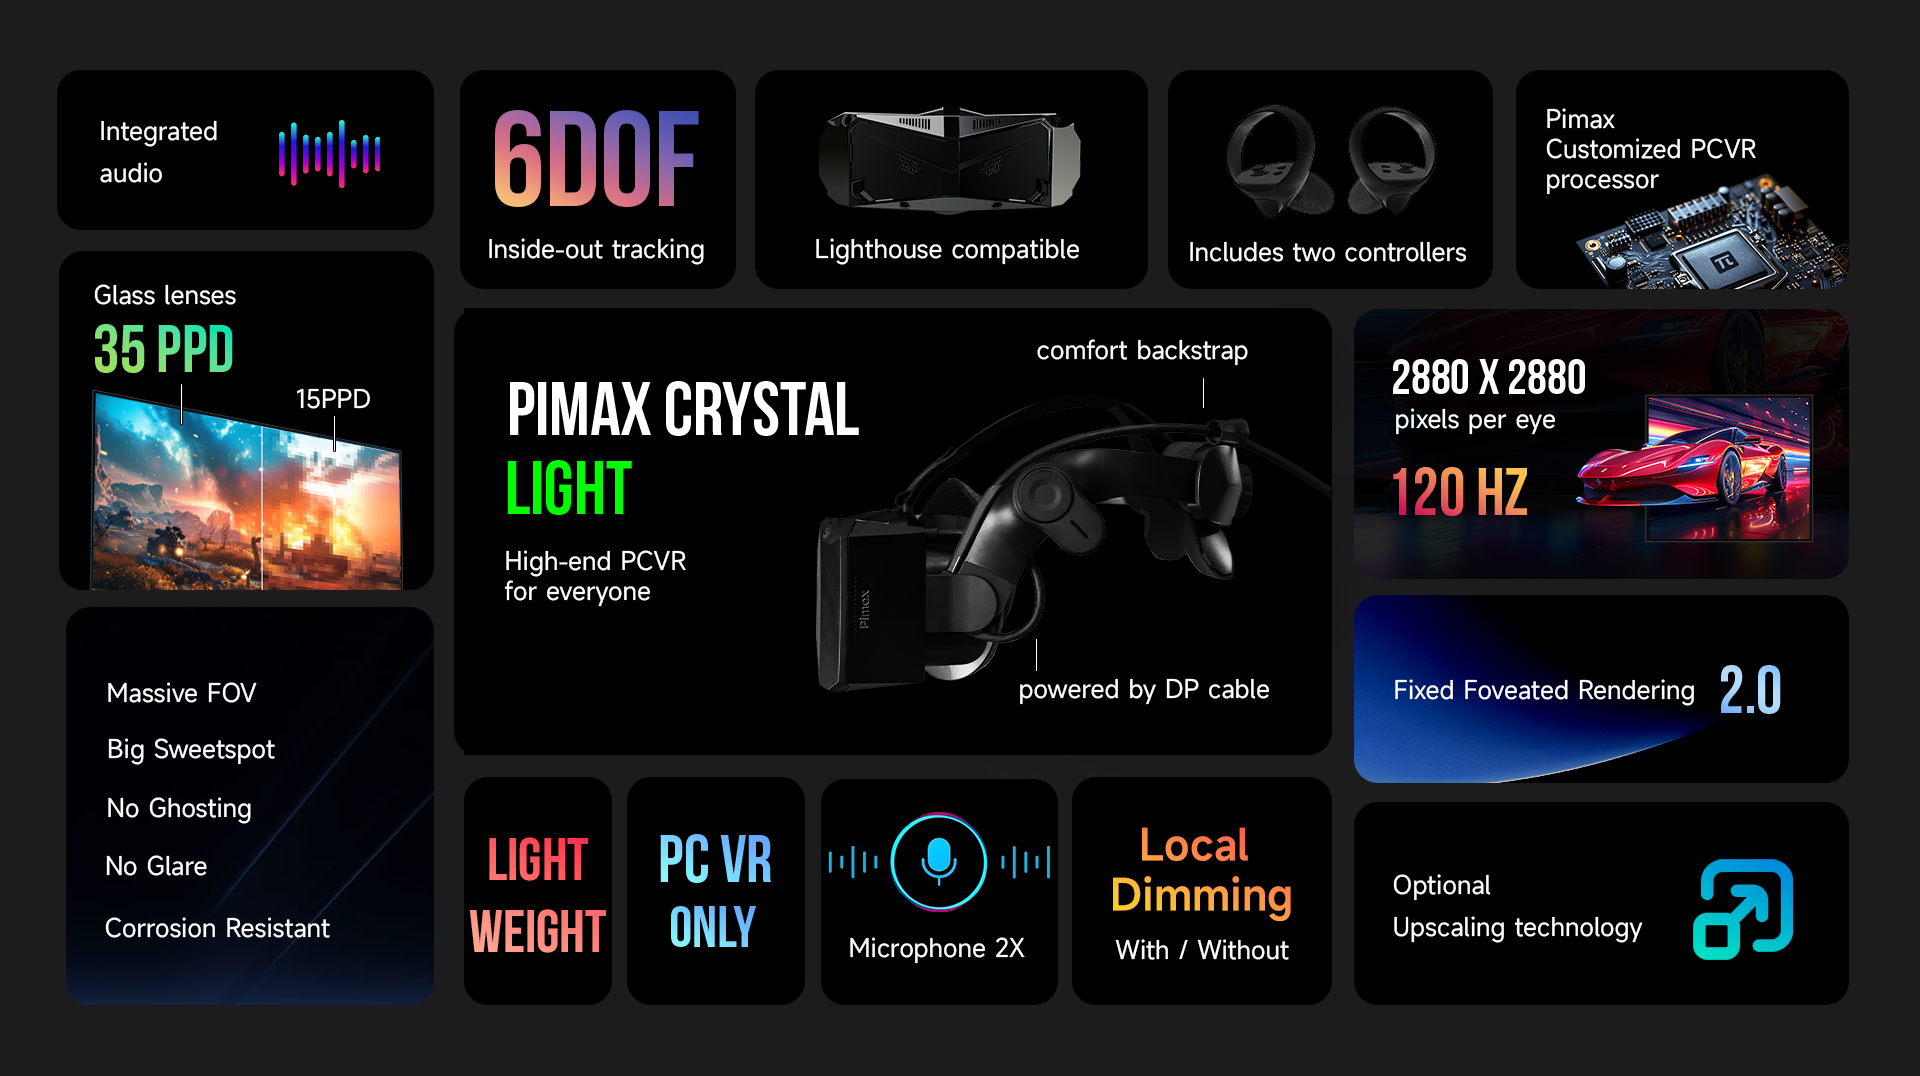 Pimax Crystal Light specs - Pimax unveils an even more high-end VR headset – Pimax Crystal Super, an affordable Crystal Light, and Airlink for the original Crystal